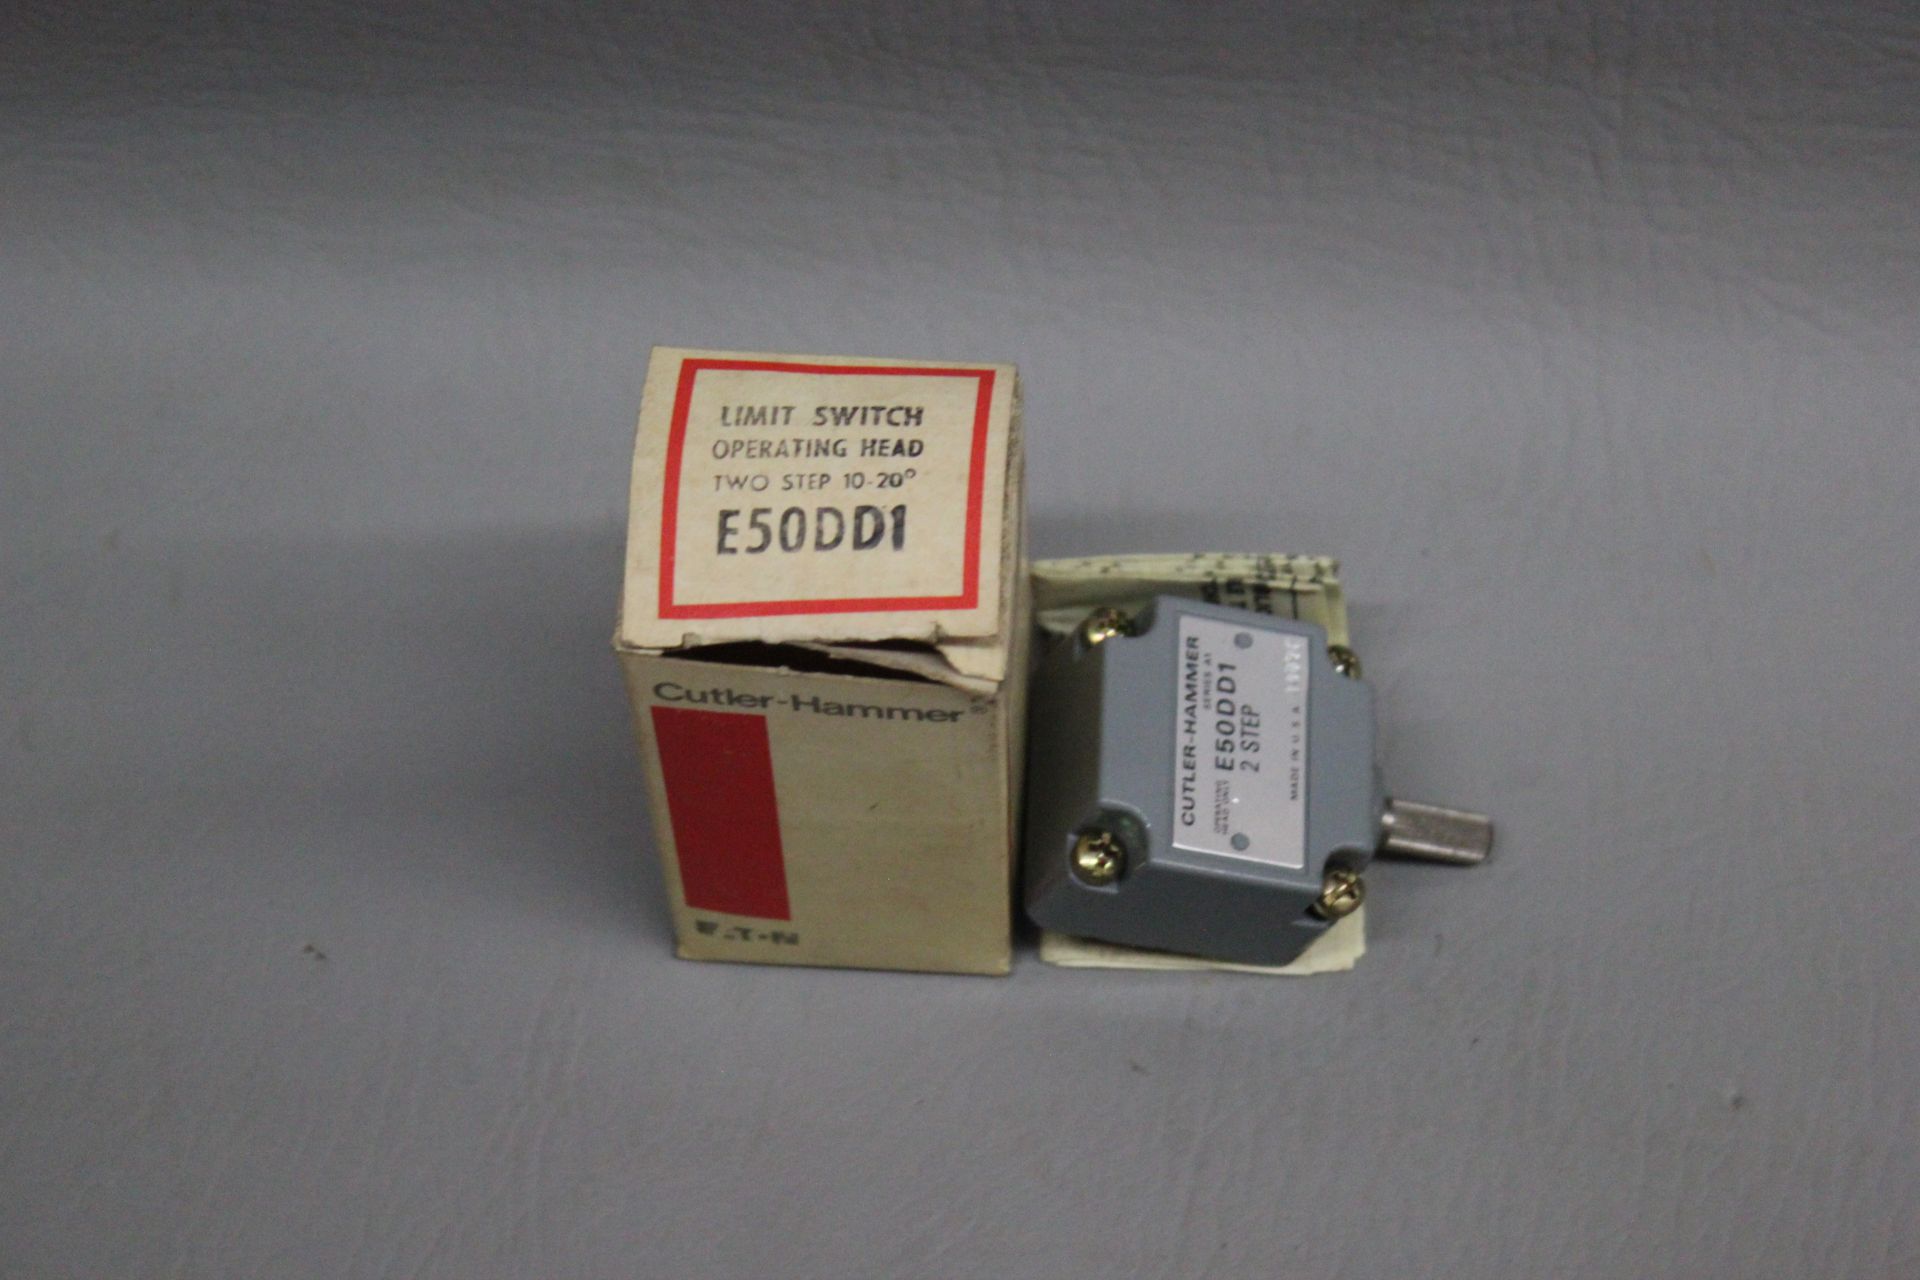 NEW OLD STOCK CUTLER HAMMER LIMIT SWITCH OPERATING HEAD